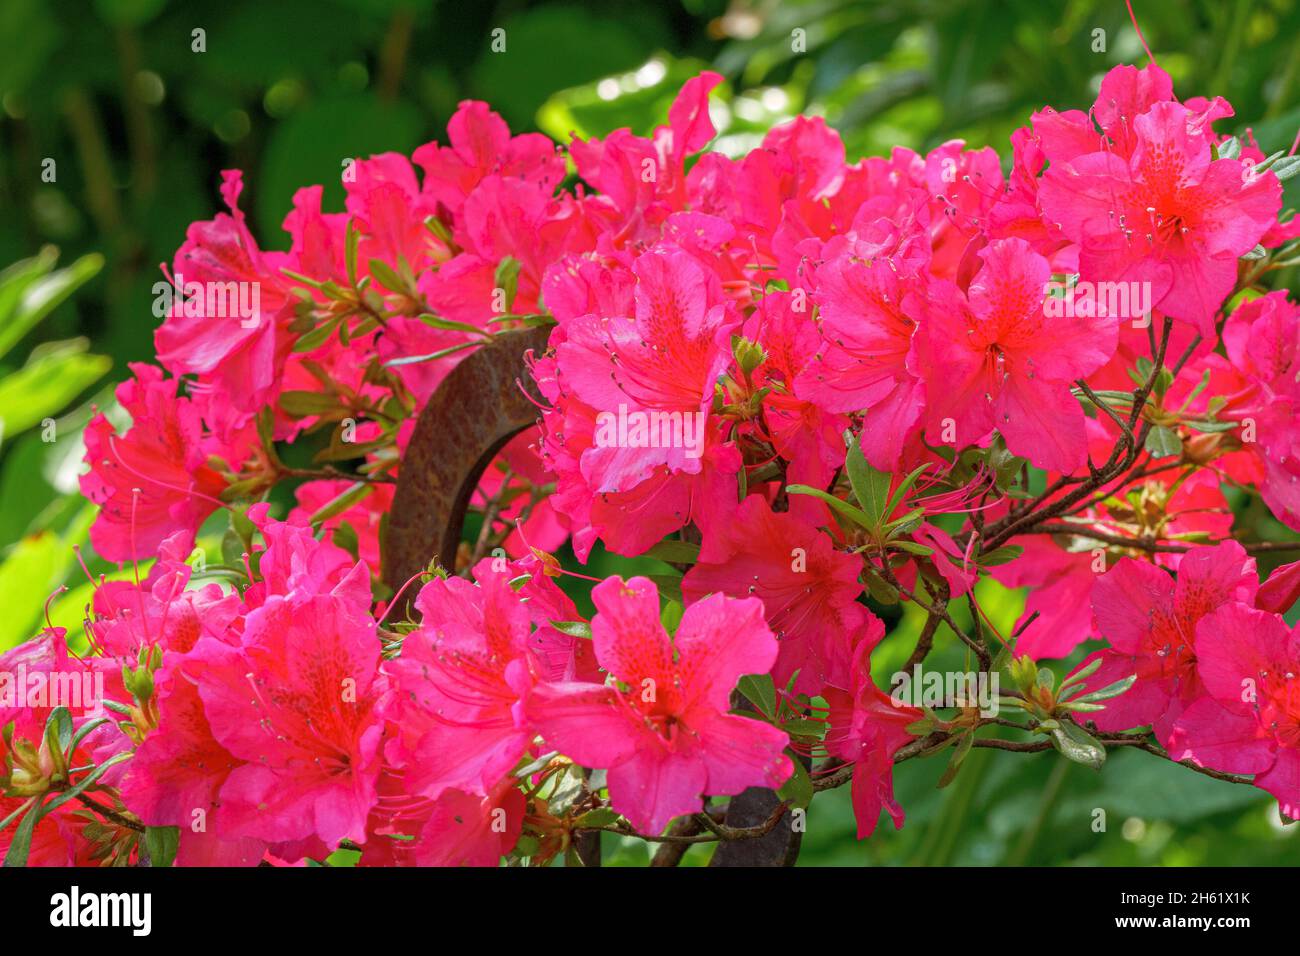 blooming rhododendron,garden plant,bavaria,germany,europe Stock Photo